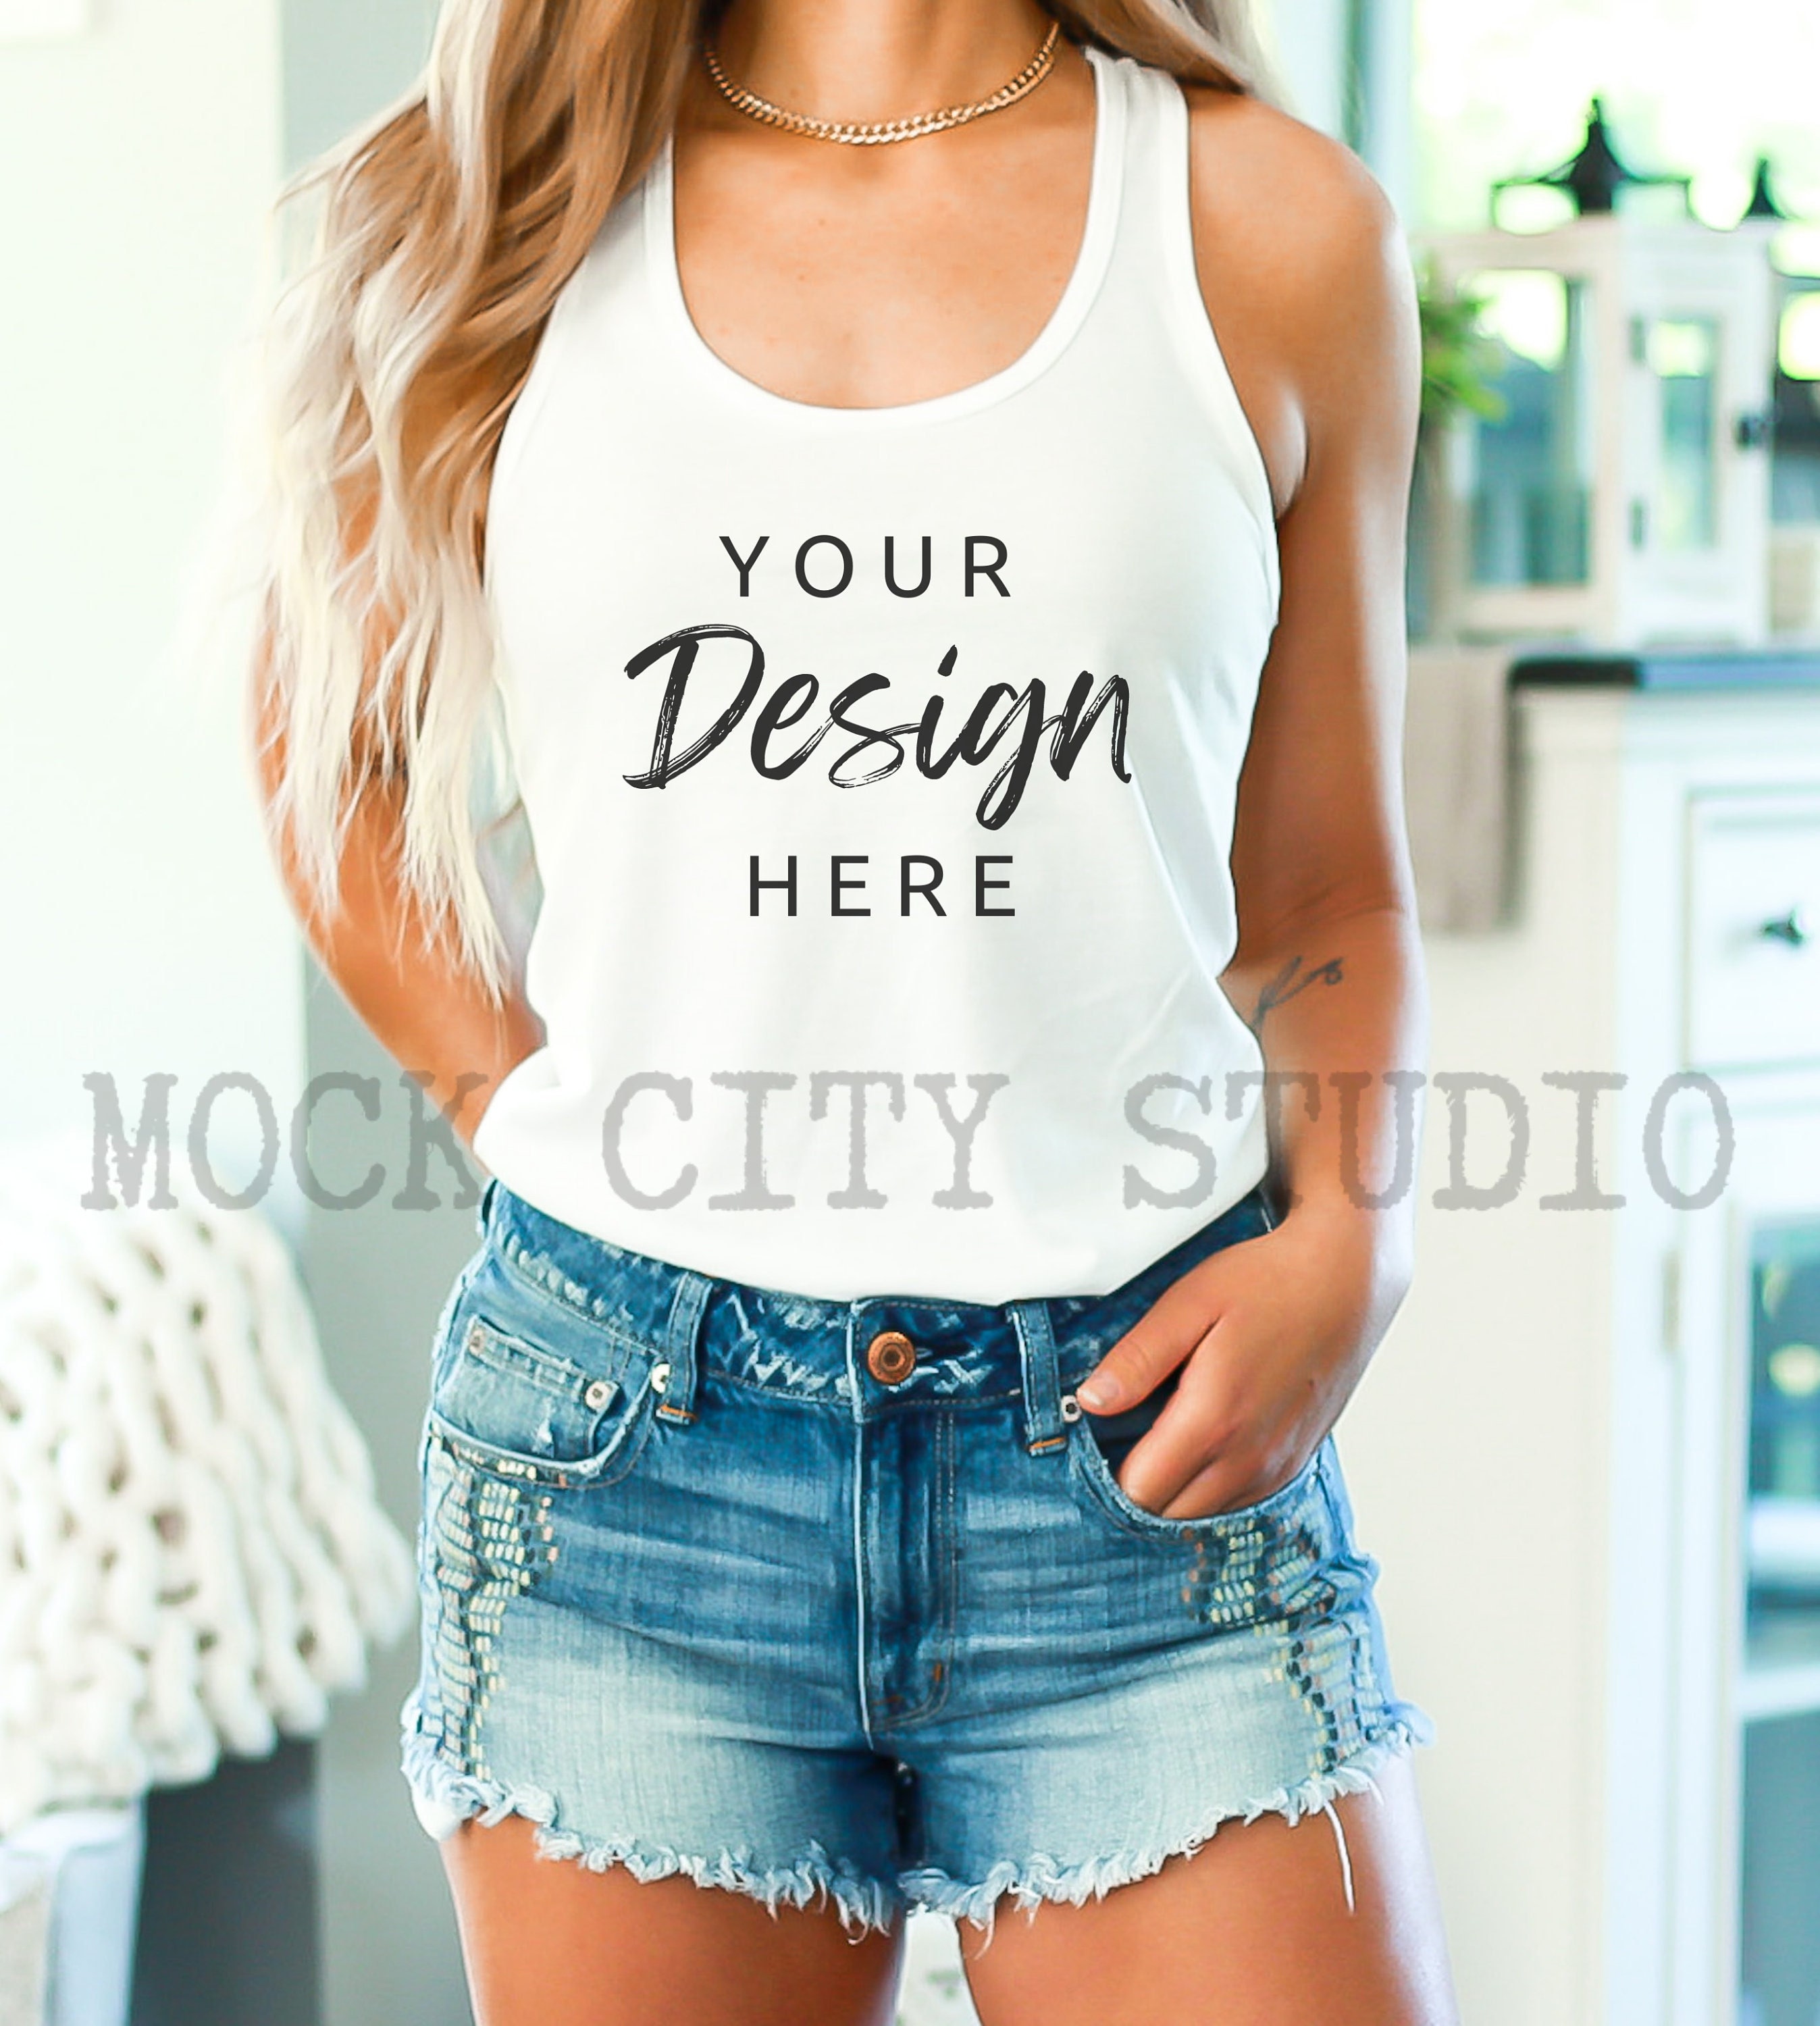 Buy White Tank Top Online In India -  India